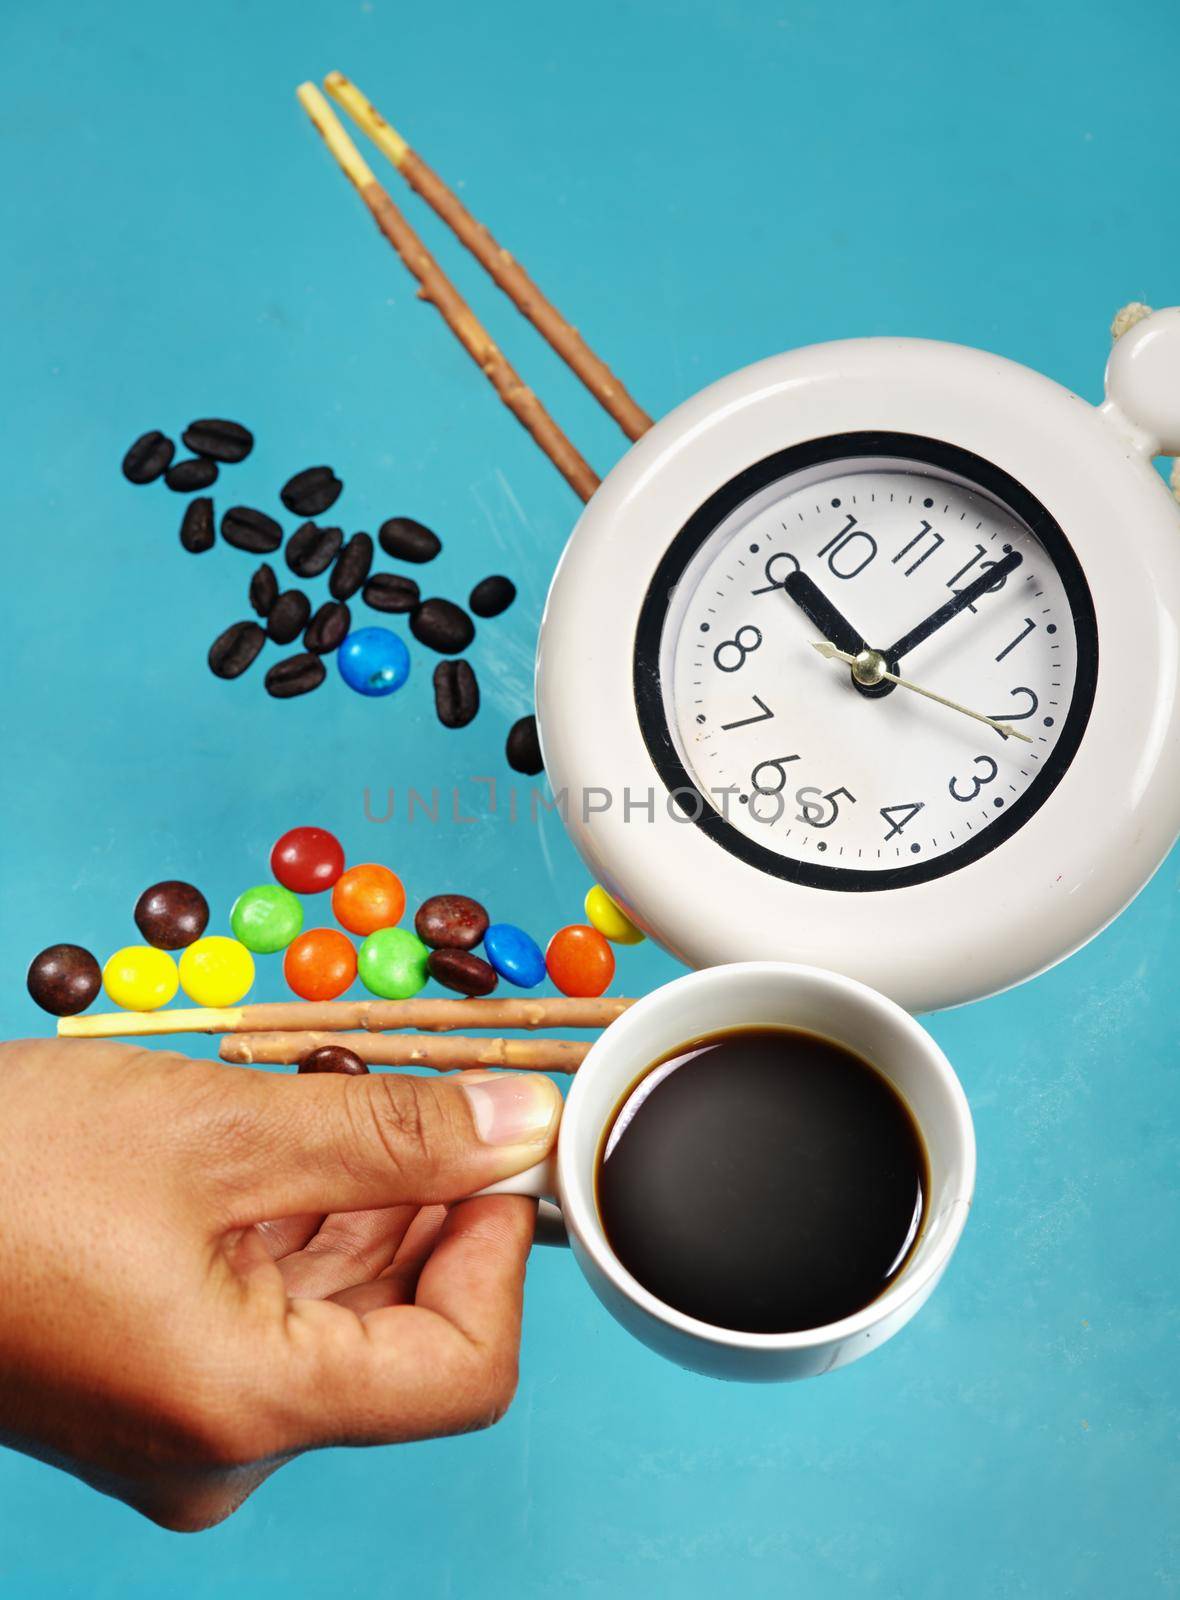 Man hand holding espresso cup with alarm clock on confectionery and sweet candy background. by noppha80